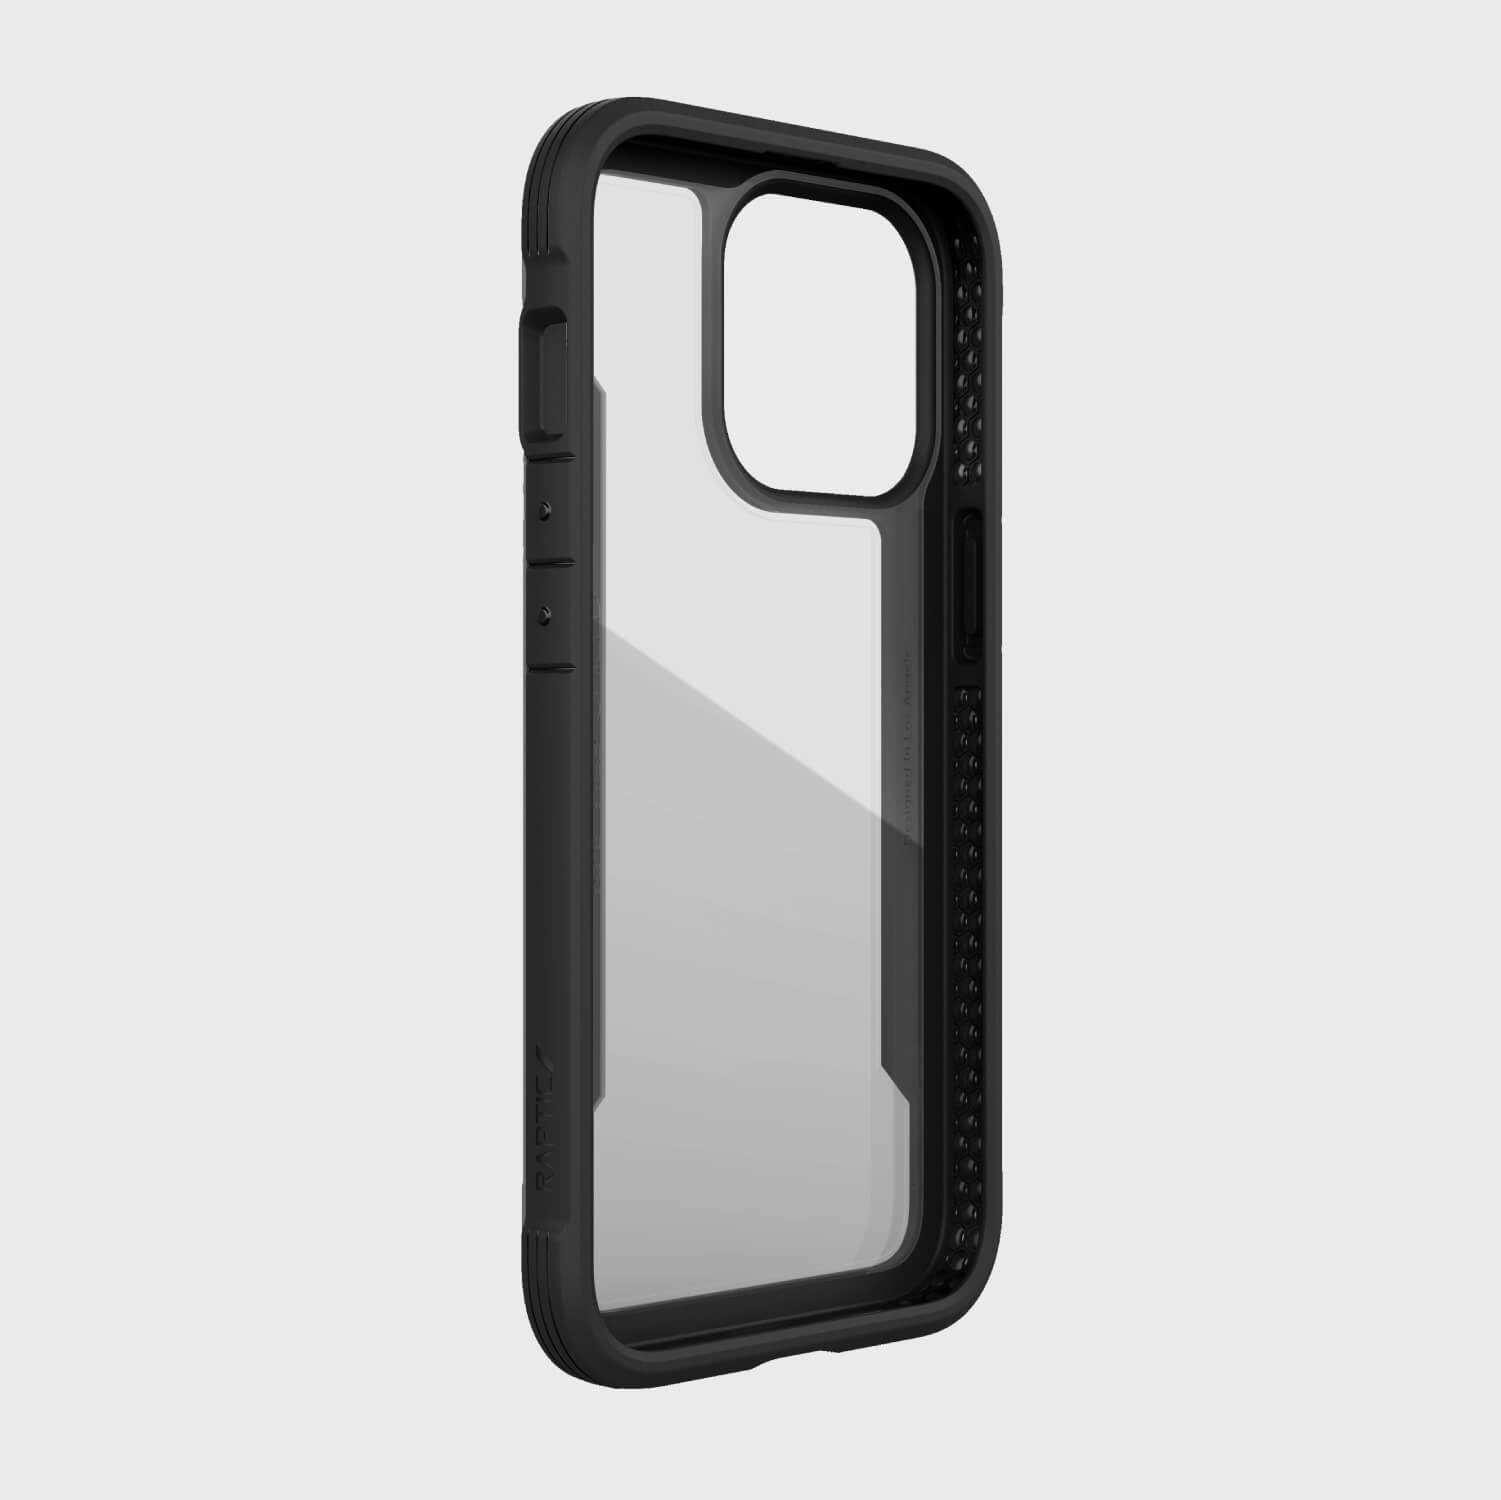 Raptic iPhone 13 Pro Case - SHIELD PRO. Provides 13 foot drop protection.